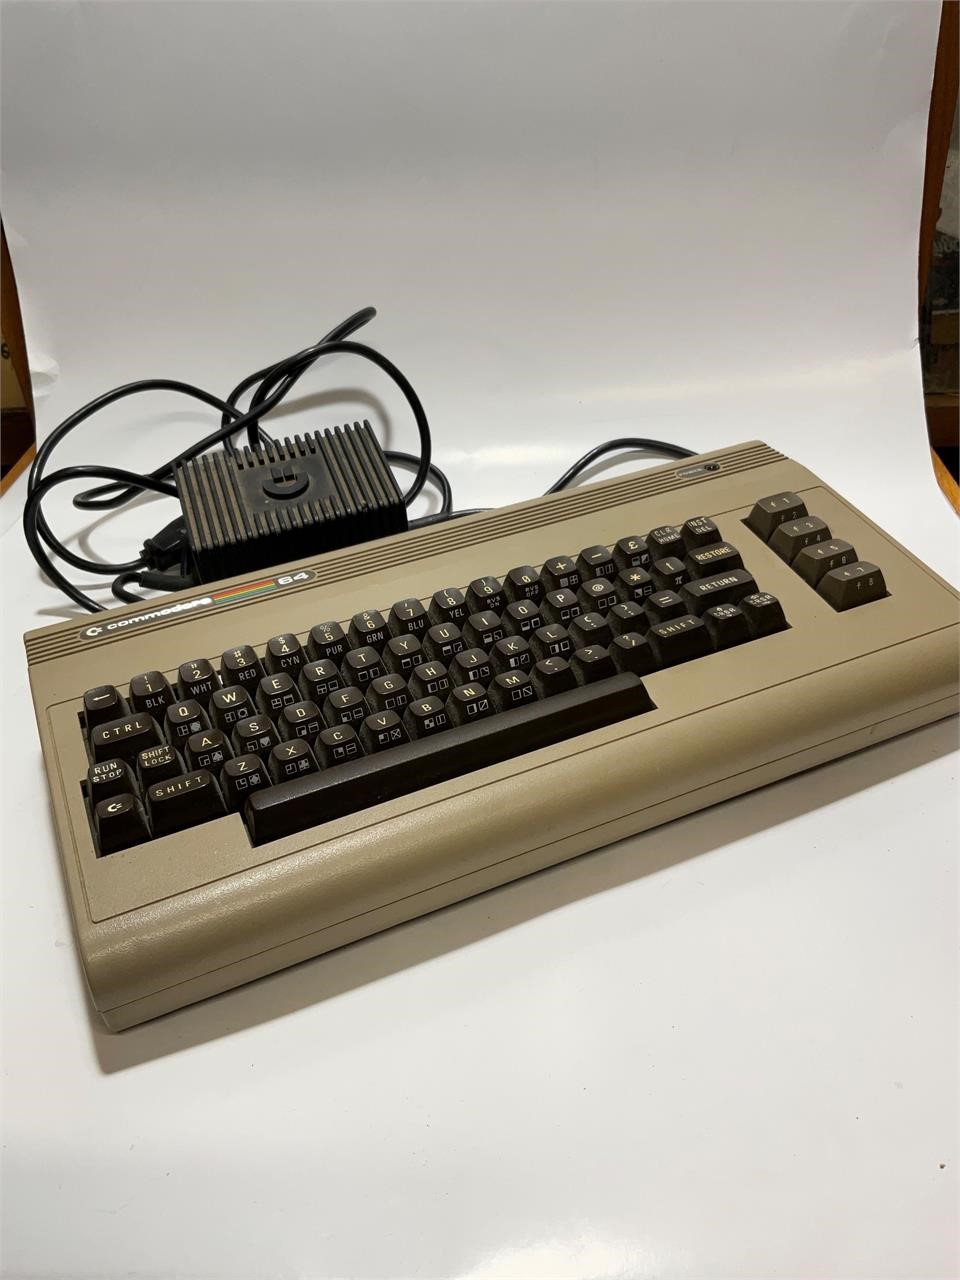 Commodore 64 computer keyboard with plug